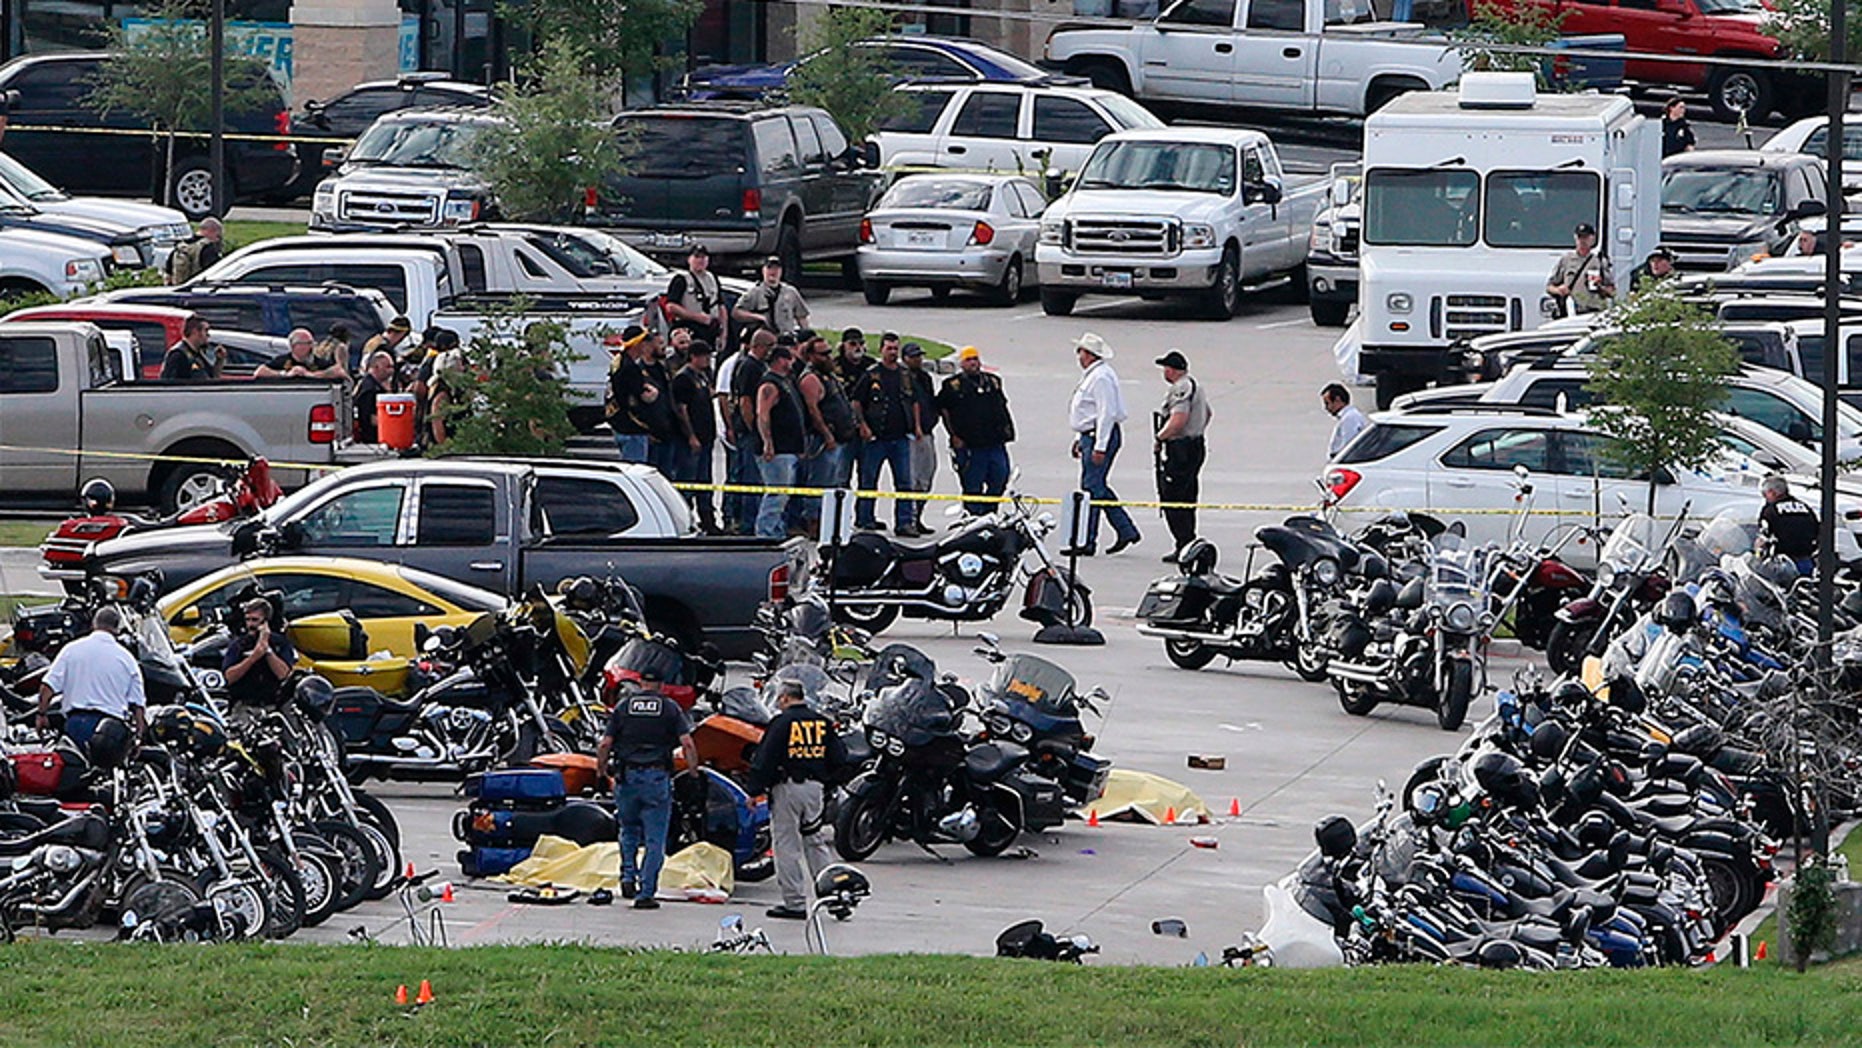 3 Bikers Hit With Murder Charges Following Shootout At Texas Restaurant 4360